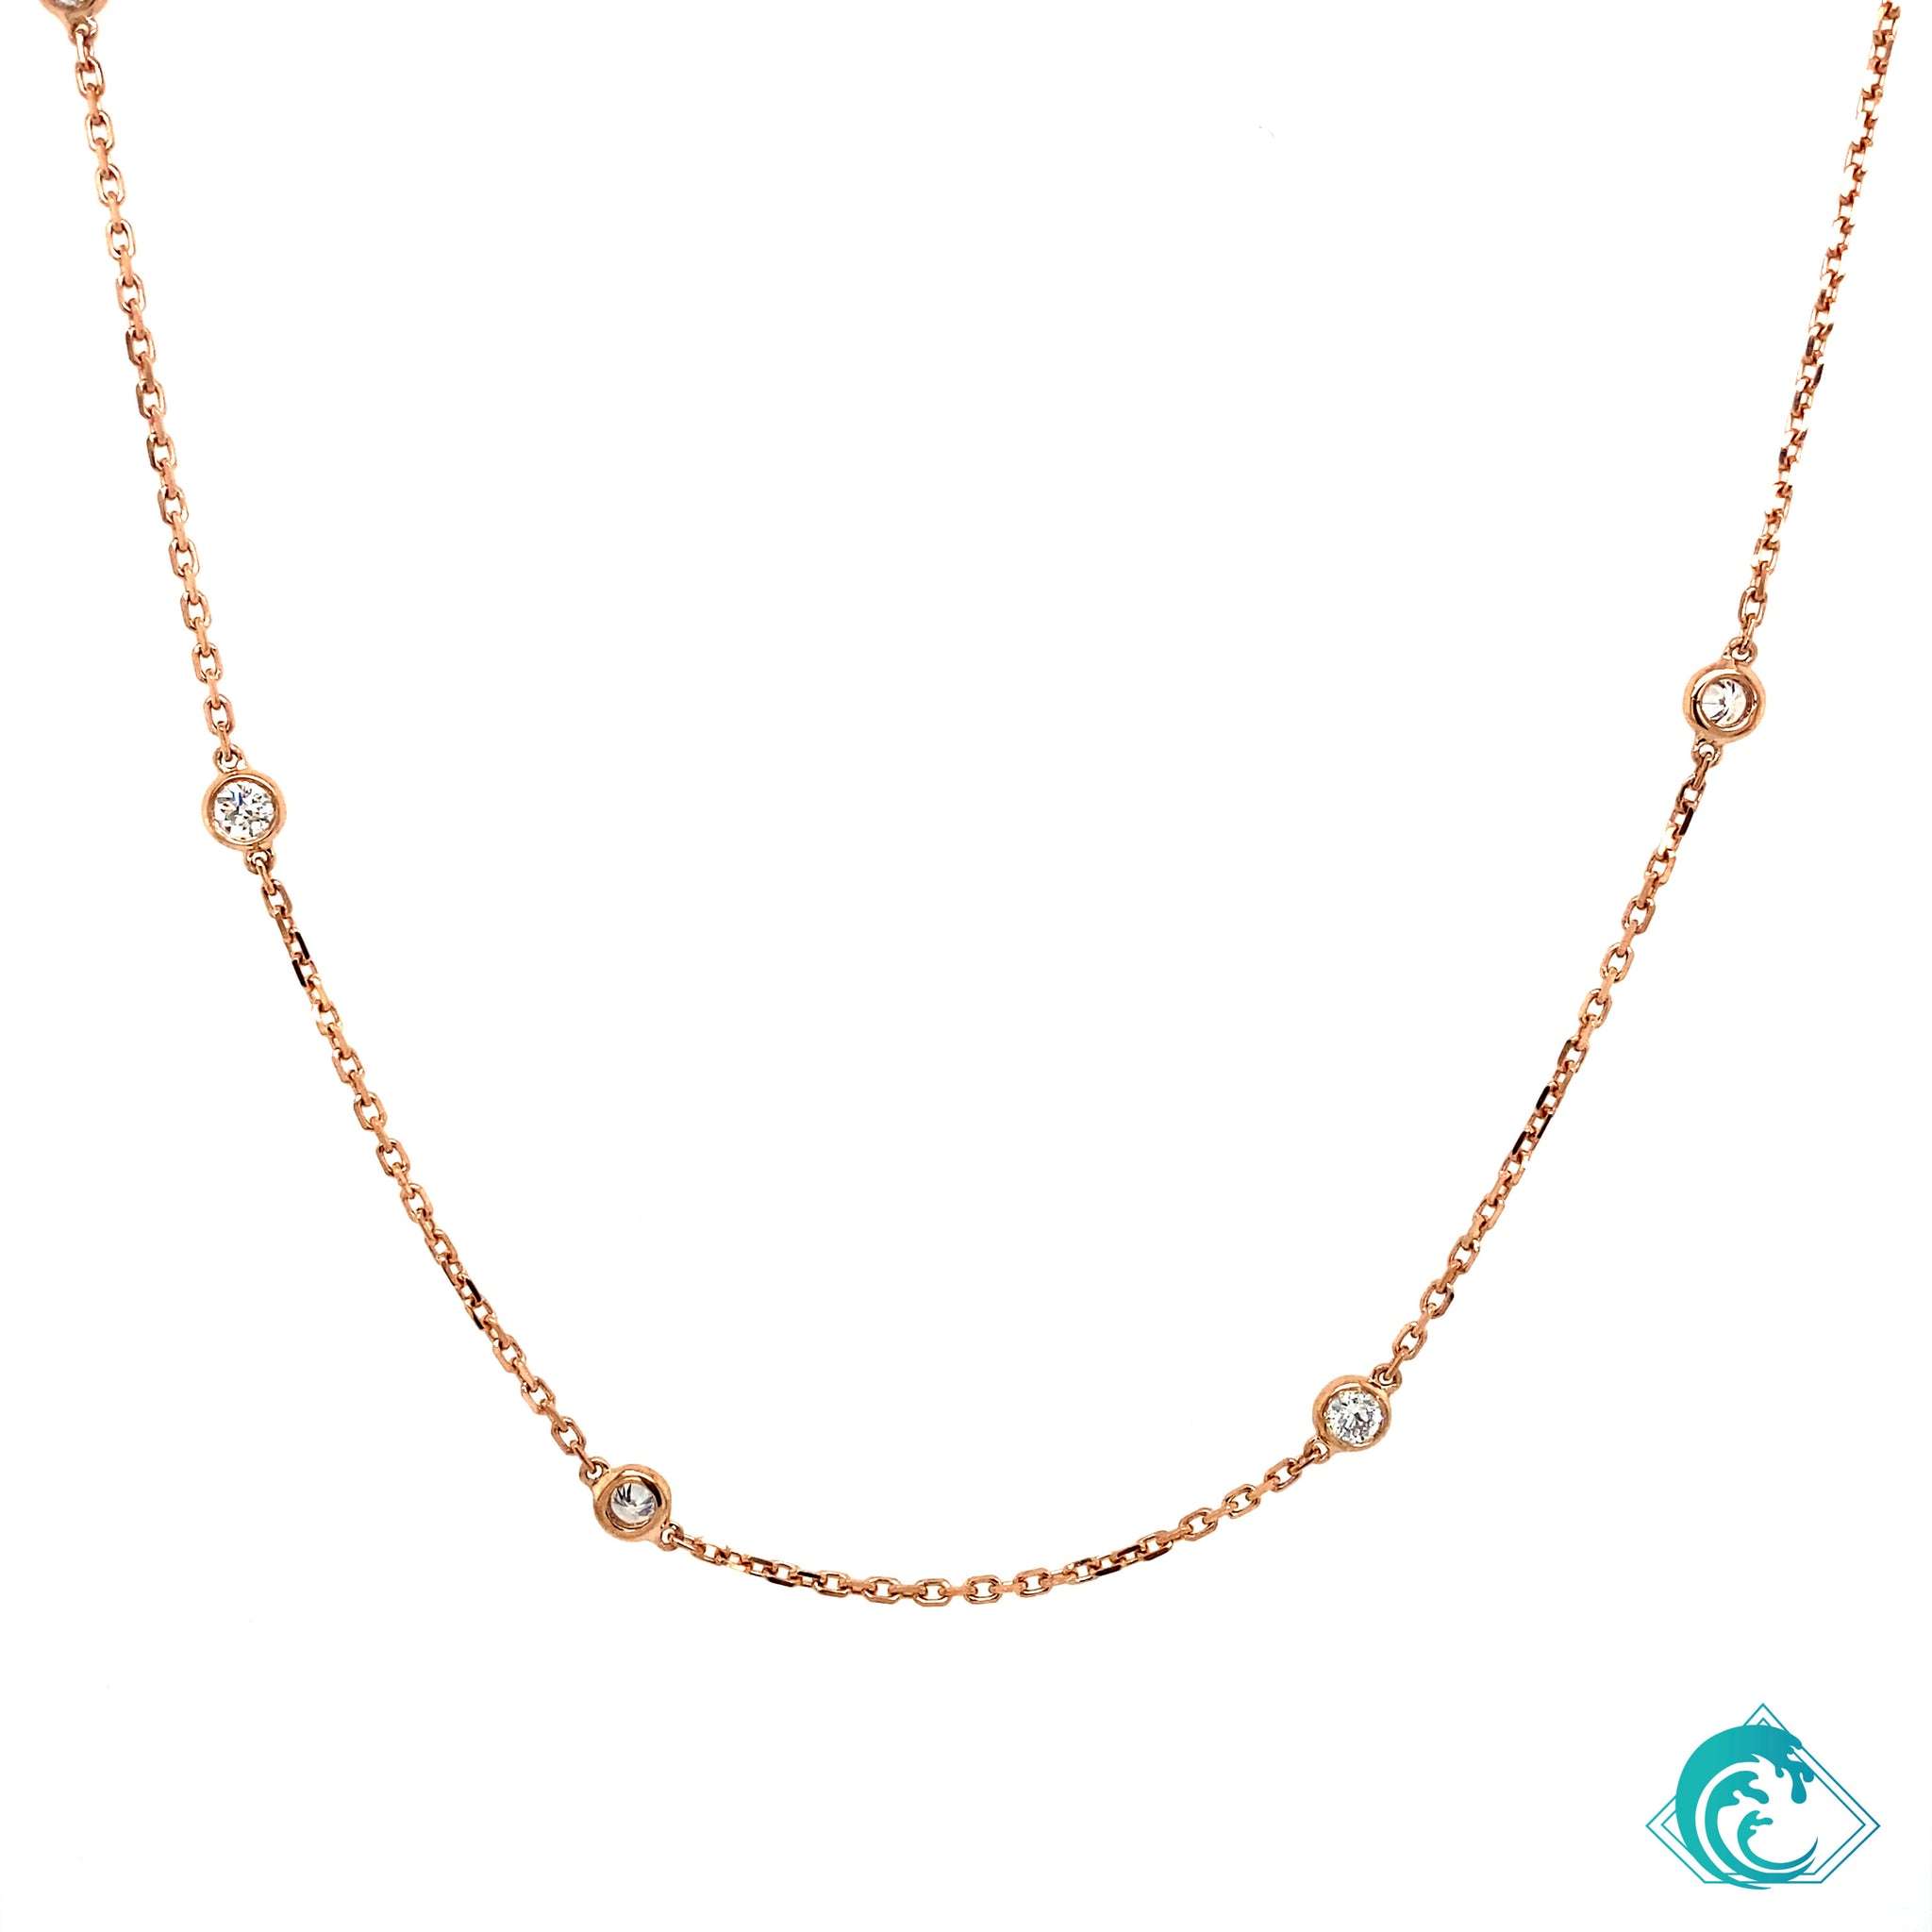 14KR Sustainably Created Diamond 9 Station Necklace (long)